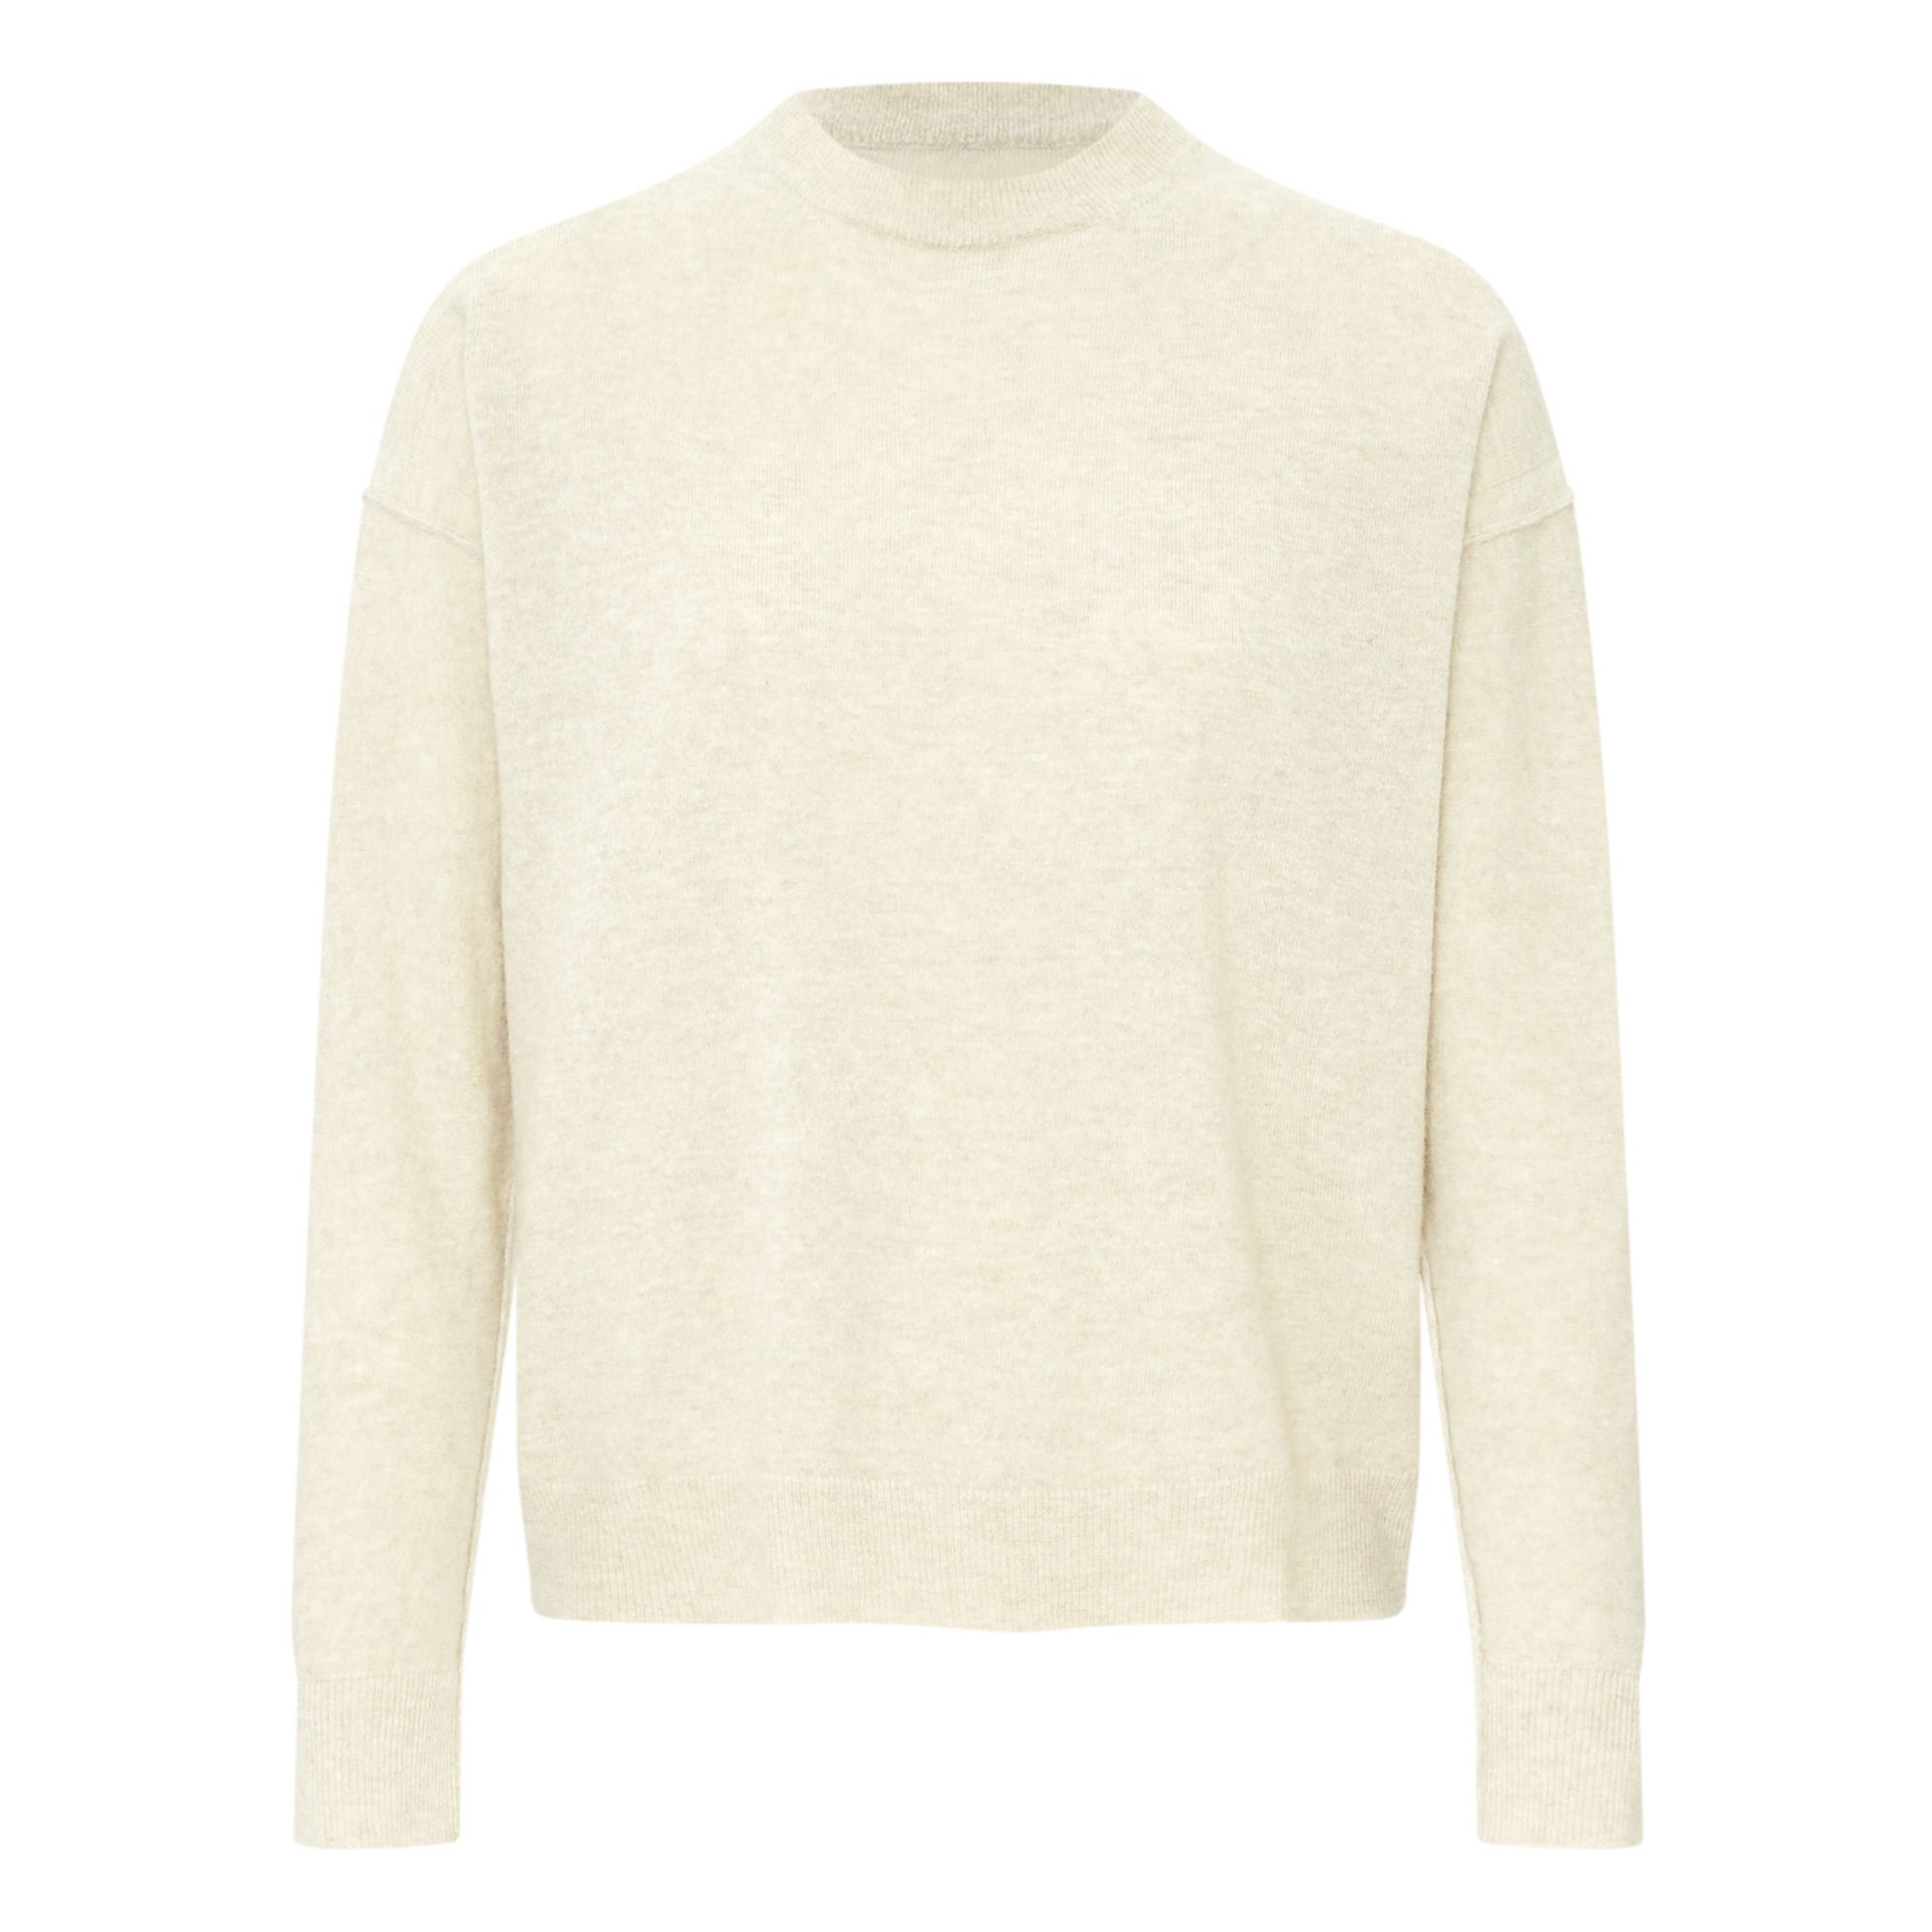 Tinsels - Pull Peppe Laine et Cachemire - Femme - Beige